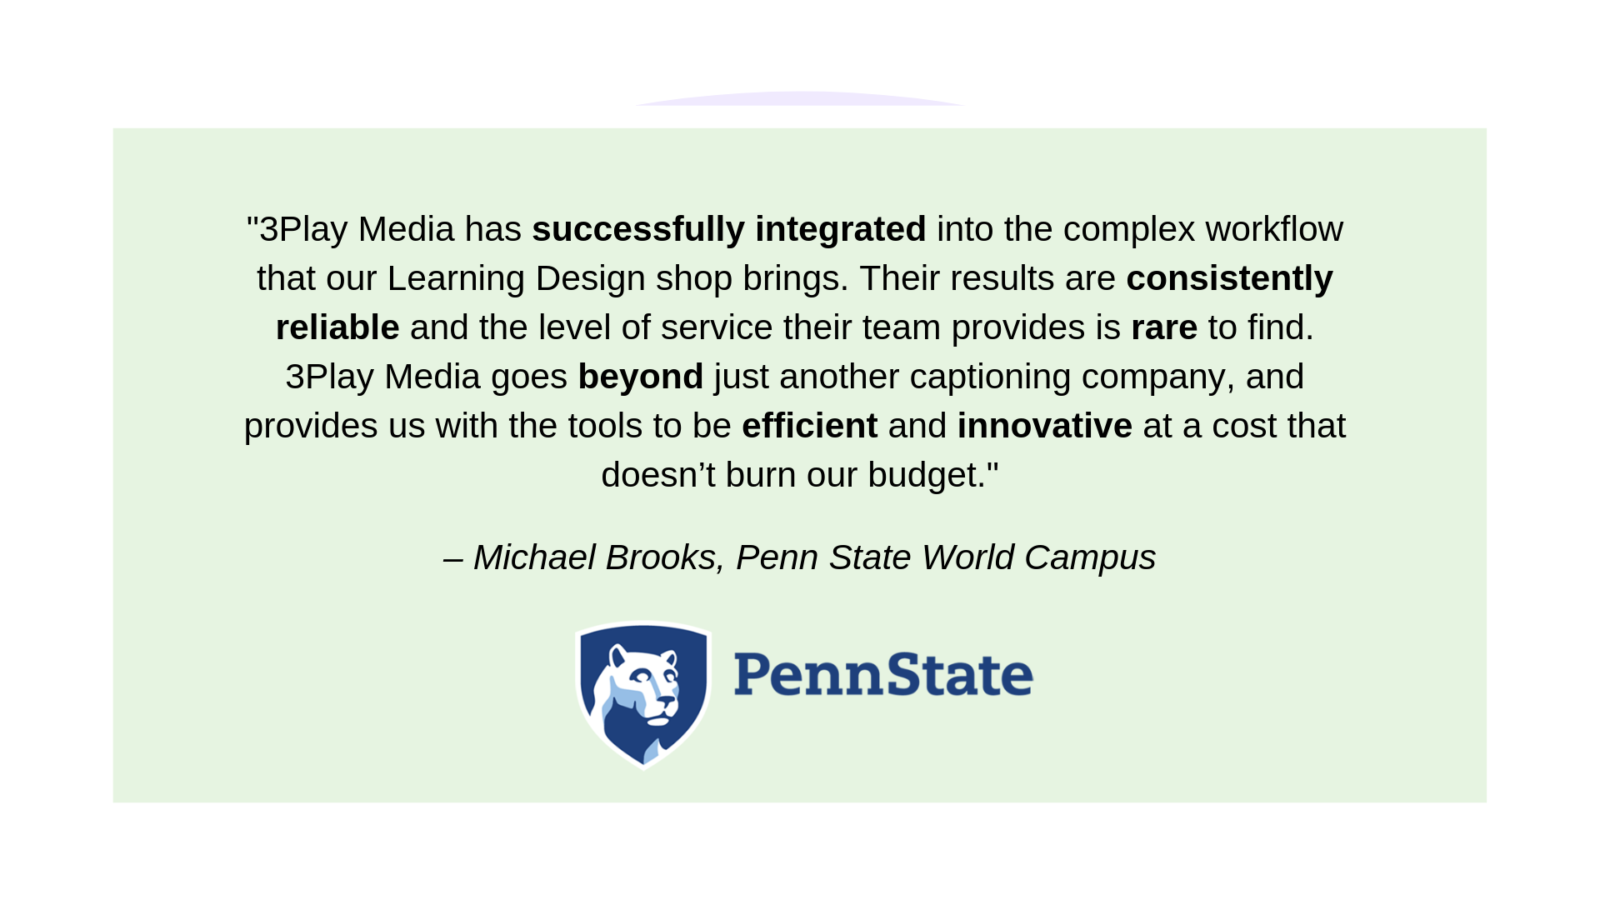 according to a 3play customer "3Play Media has successfully integrated into the complex workflow that our Learning Design shop brings. Their results are consistently reliable and the level of service their team provides is rare to find. 3Play Media goes beyond just another captioning company, and provides us with the tools to be efficient and innovative at a cost that doesn’t burn our budget."